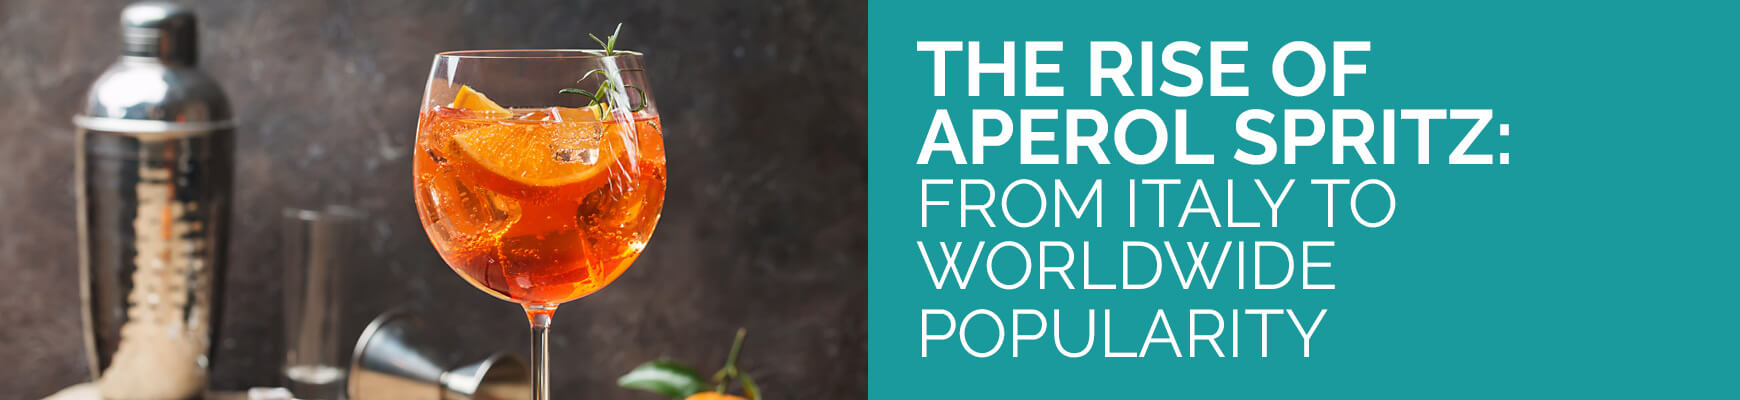 The Rise of Aperol Spritz: From Italy to Worldwide Popularity